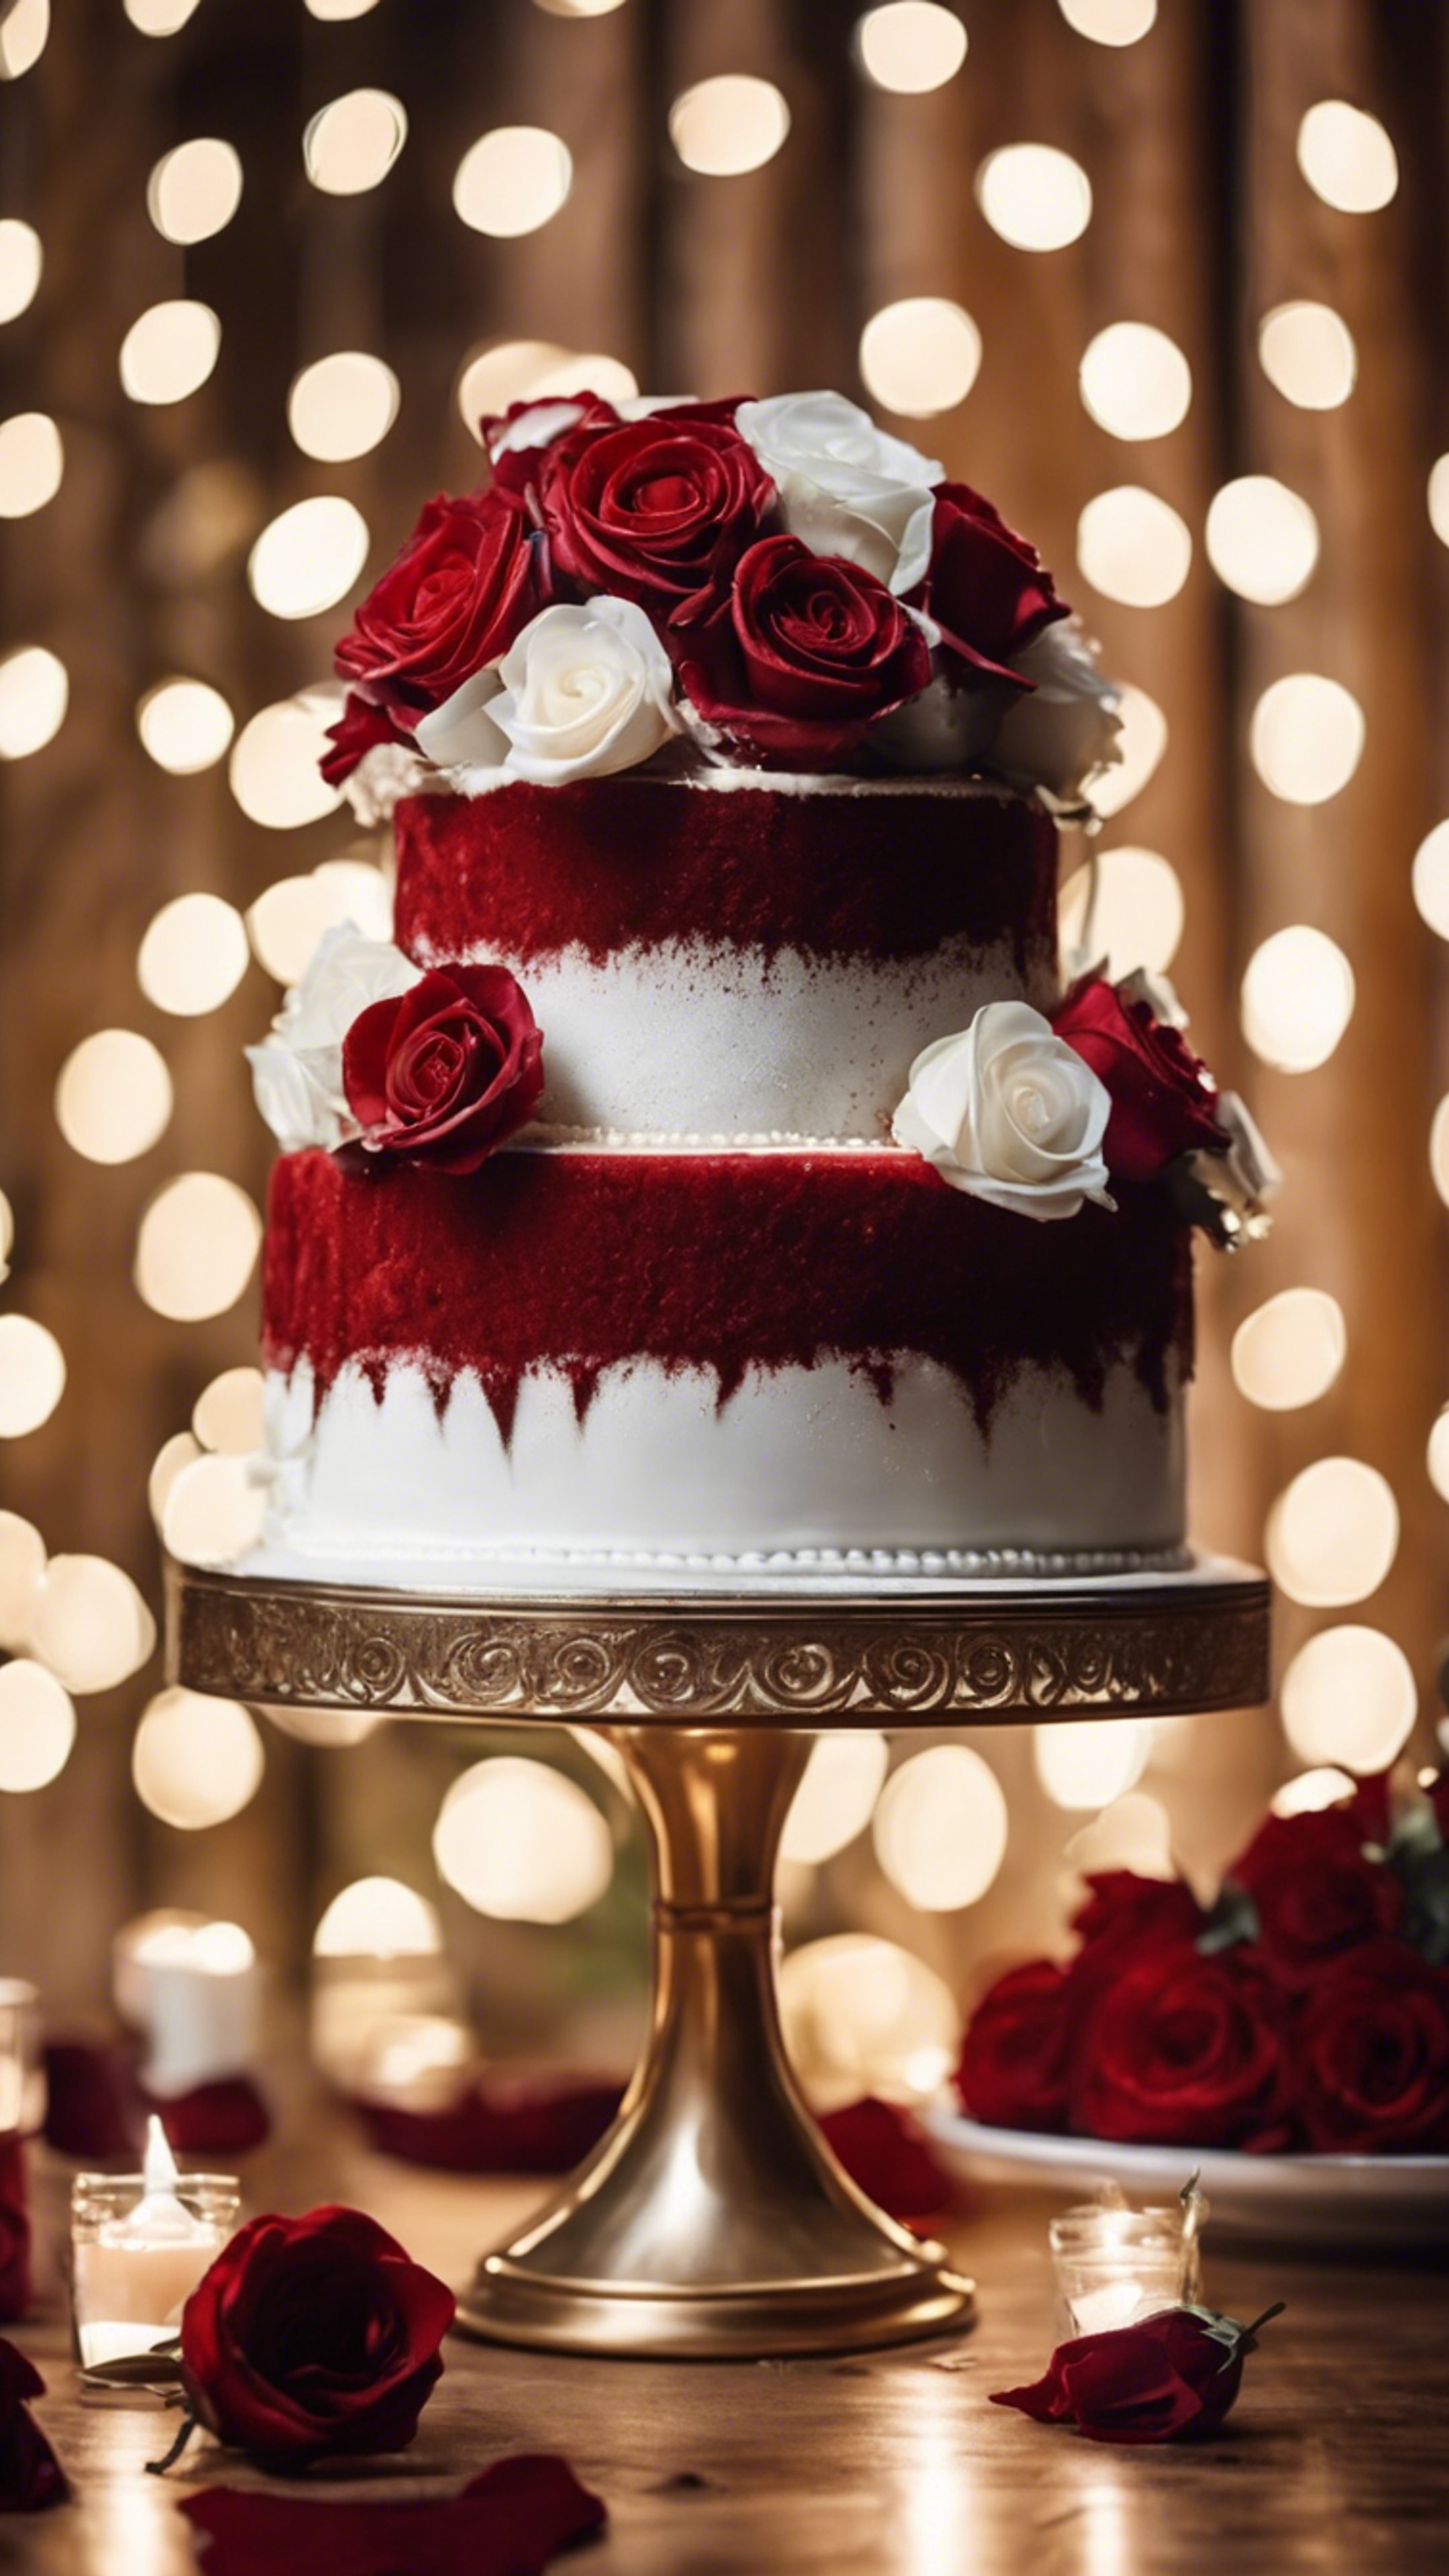 Three-tiered red velvet wedding cake adorned with white roses, against a backdrop of twinkling fairy lights. ورق الجدران[b48557e9e8f84a90b888]